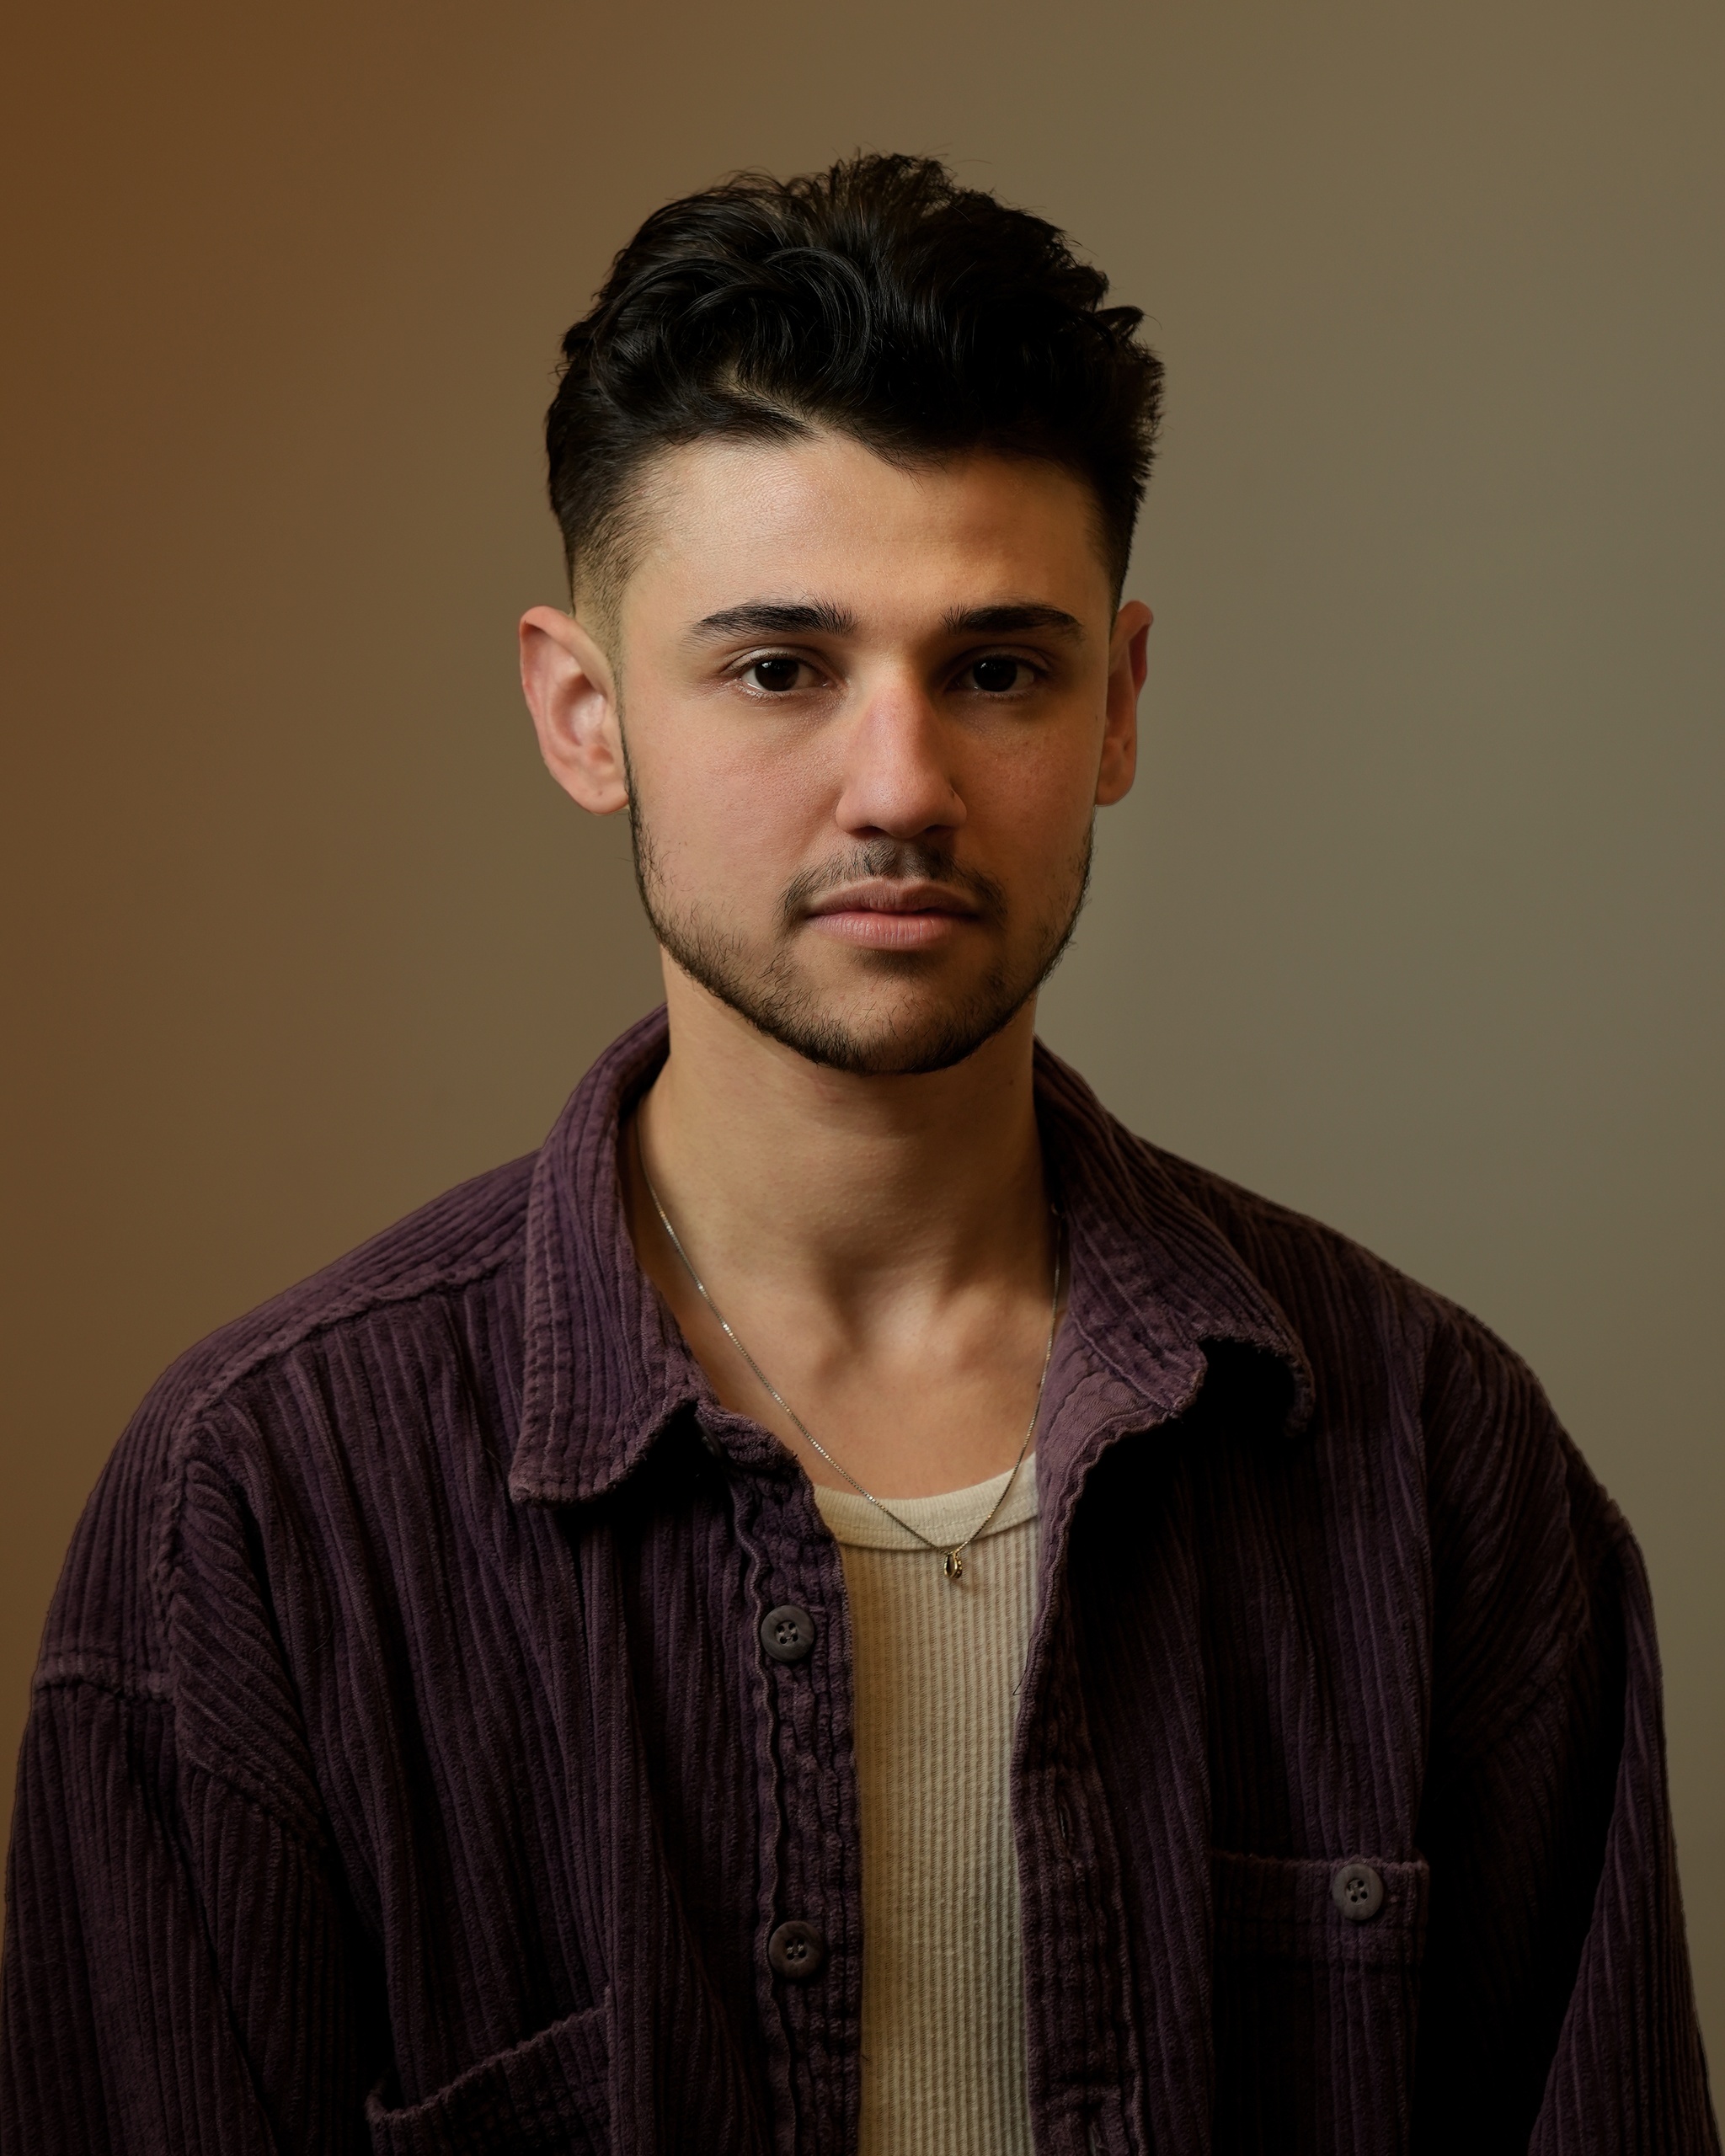 A portrait of Arzu Salman against a neutral brown background. Arzu has dark brown hair styled with a fade on the sides and a thin beard along his chin line. He looks directly at us. 